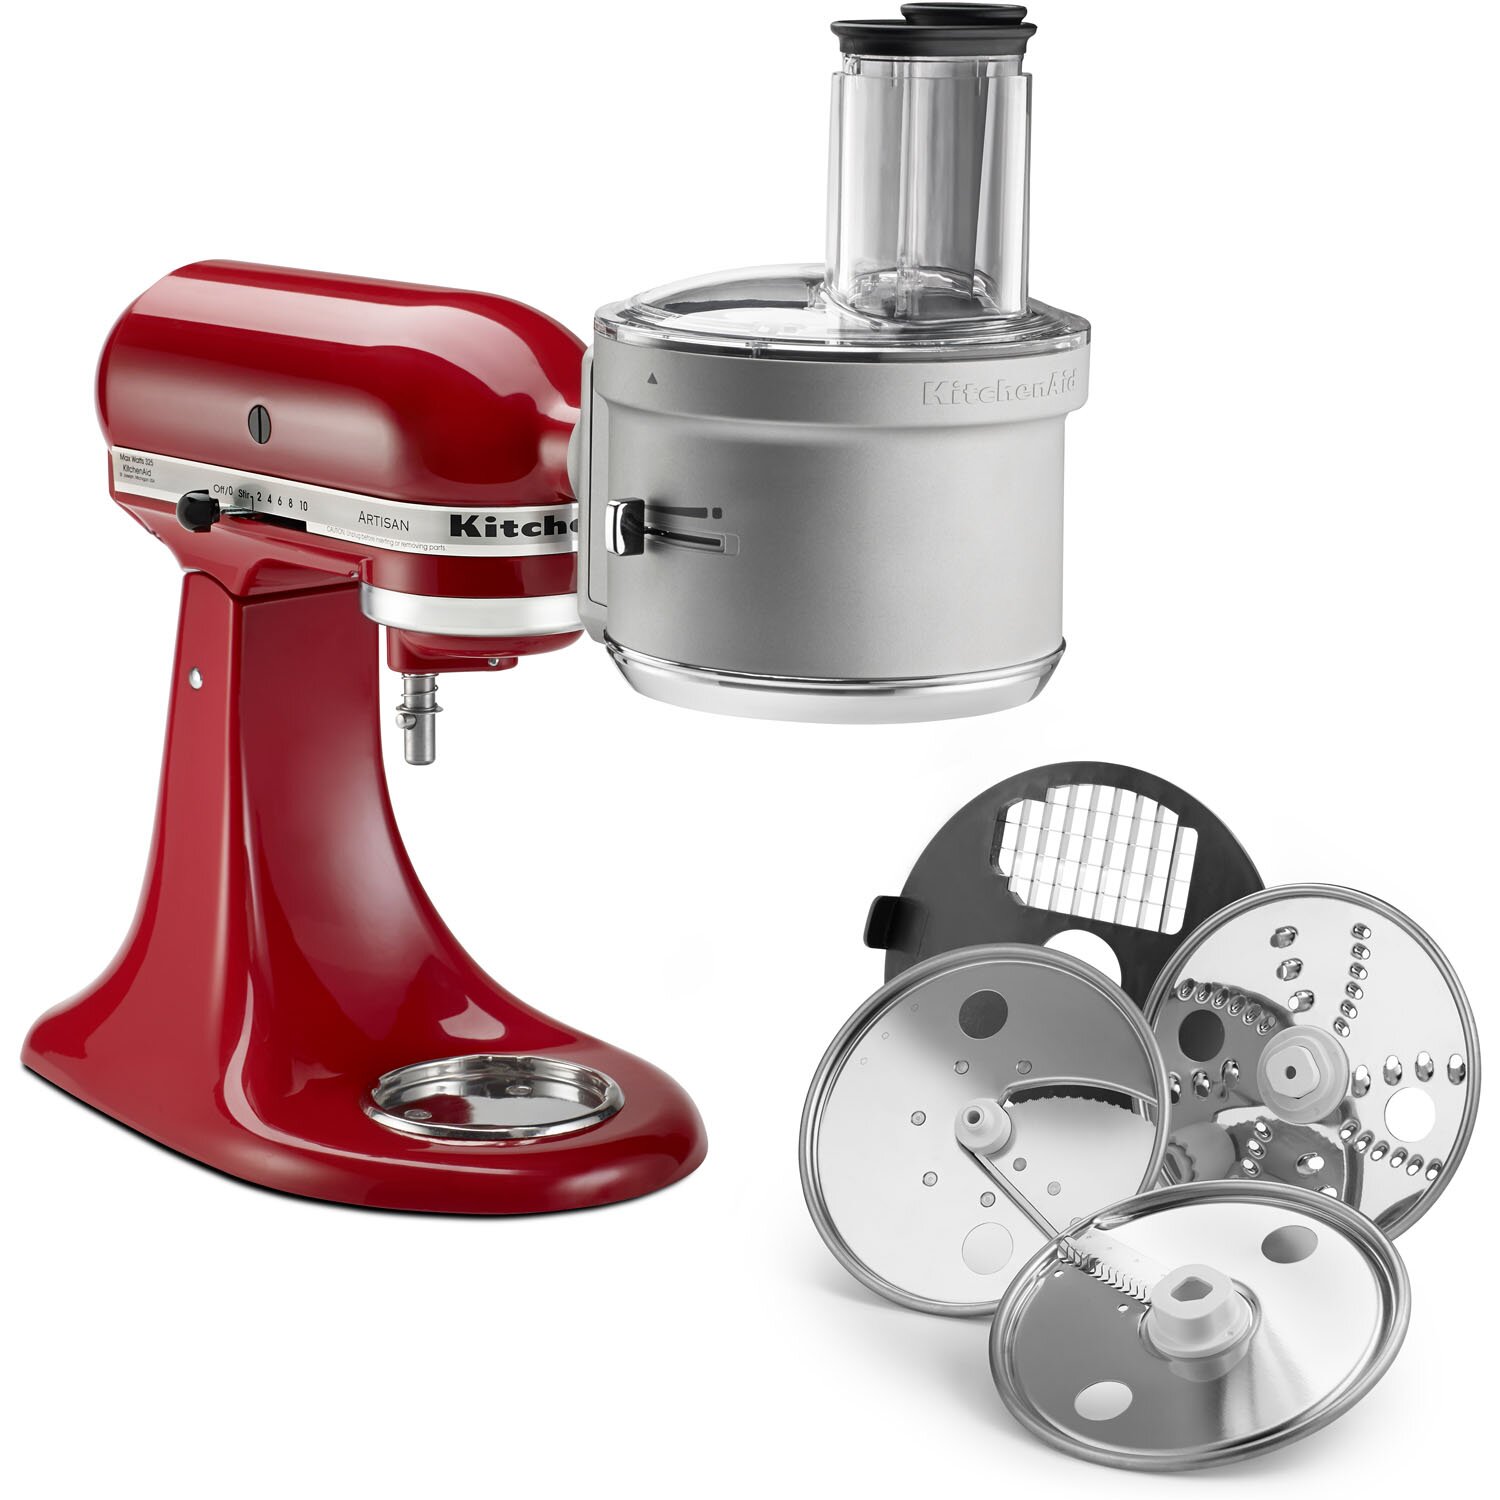 KitchenAid Food Processor Attachment With Dicing Kit 